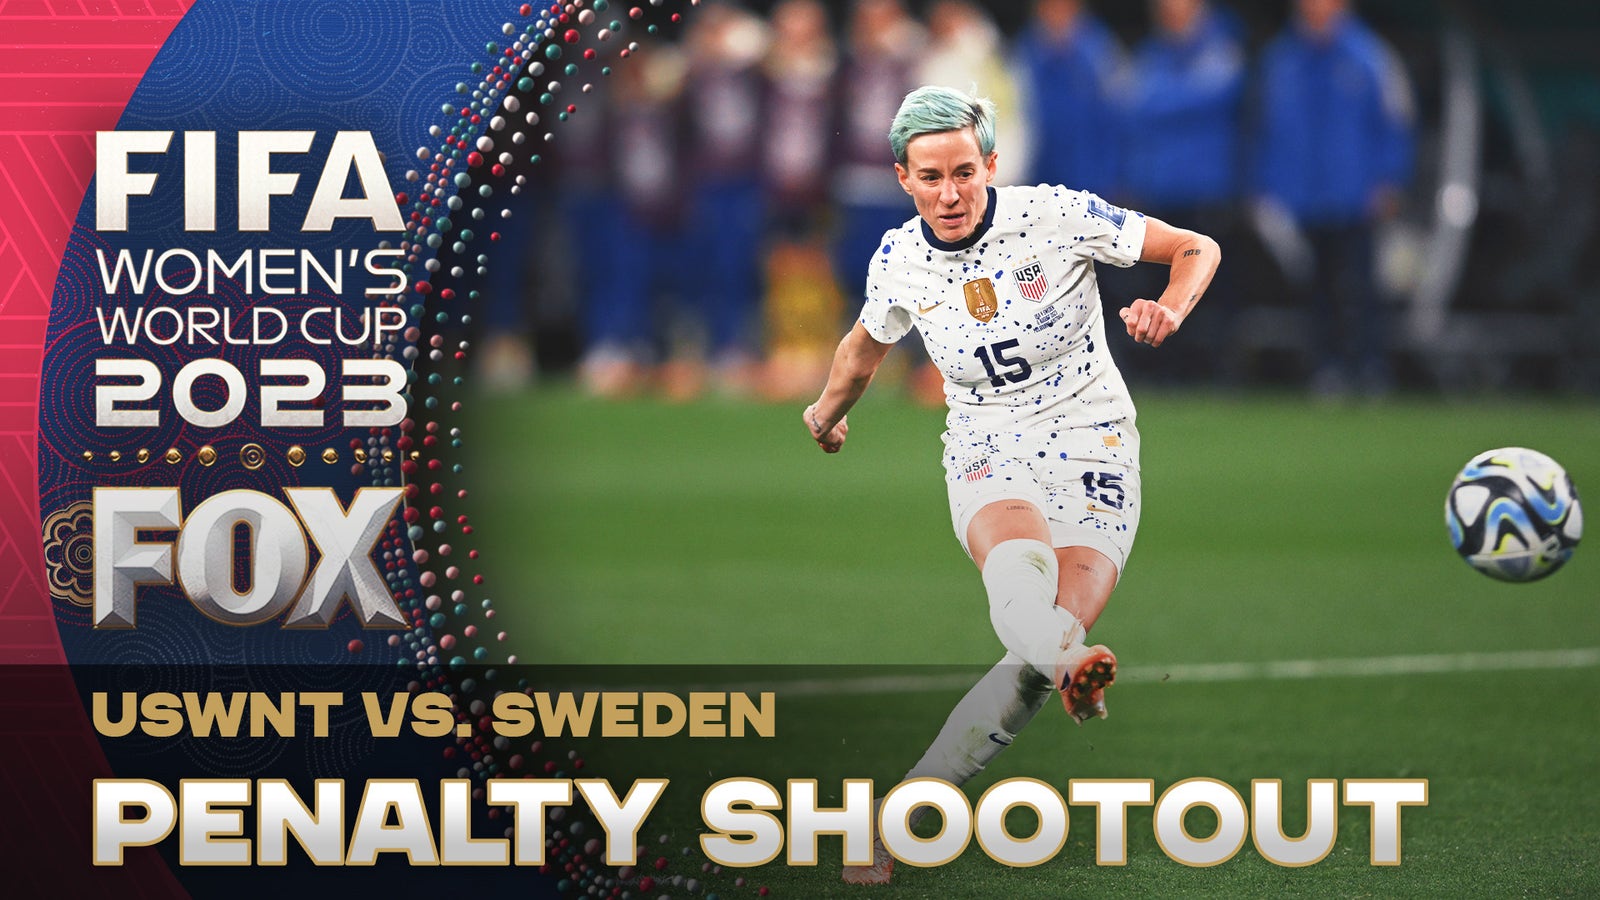 USWNT vs. Sweden in a wild penalty shootout